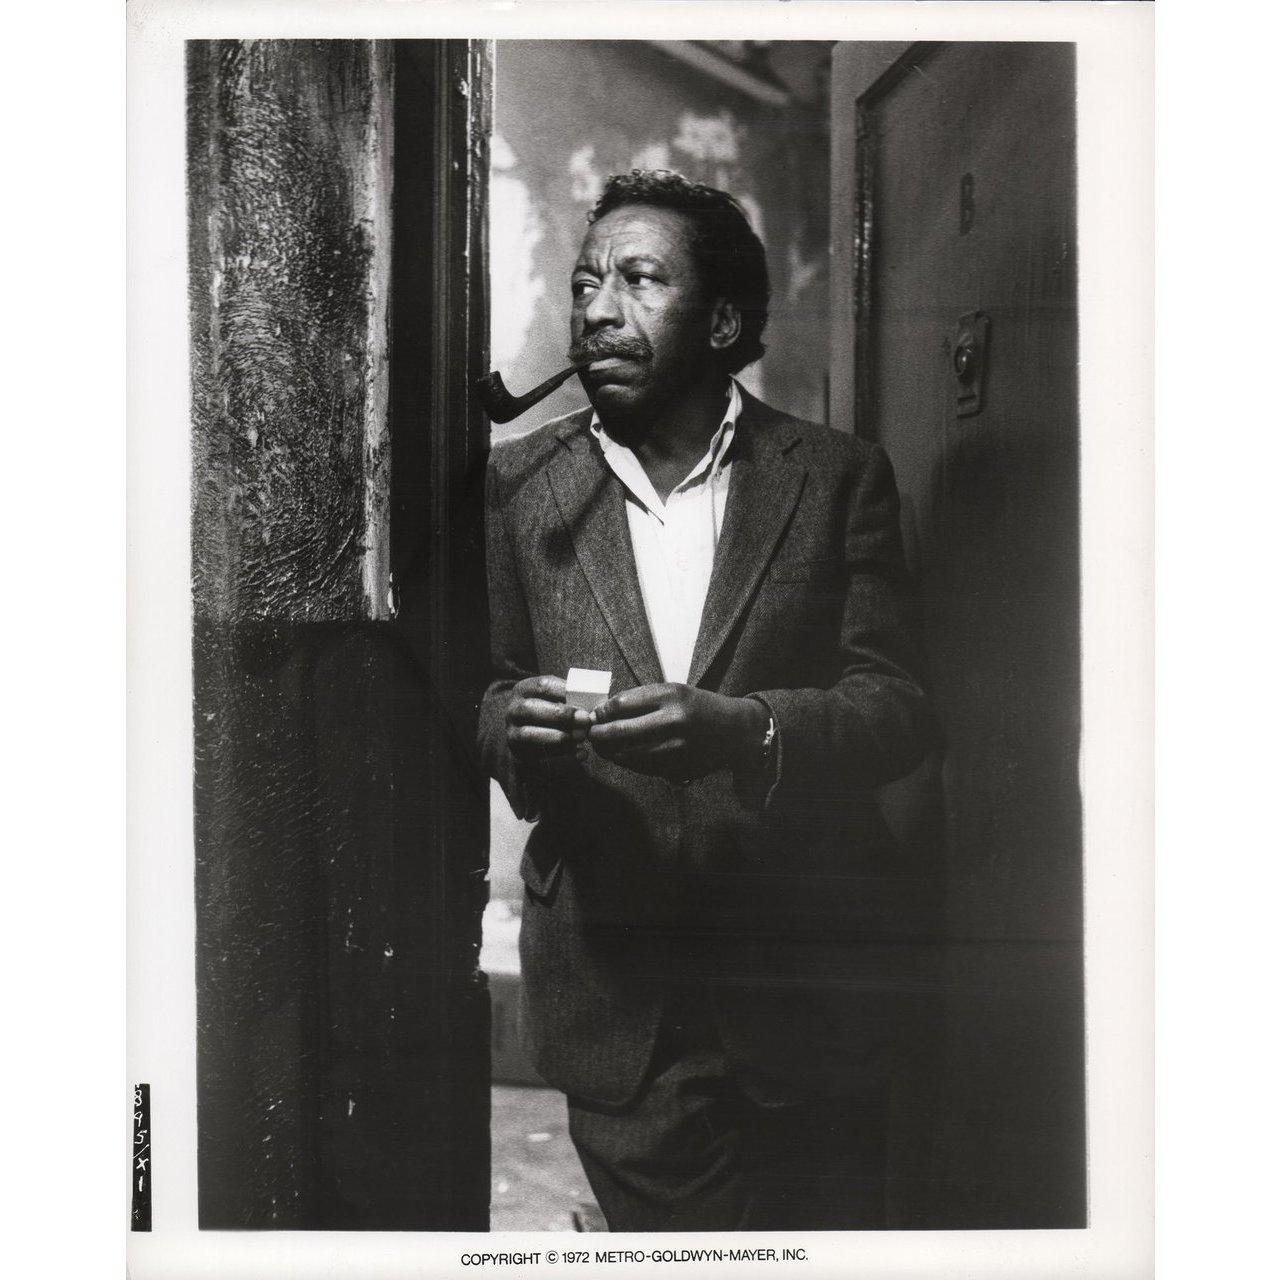 Original 1971 U.S. silver gelatin single-weight photo for the film Shaft directed by Gordon Parks with Richard Roundtree / Moses Gunn / Charles Cioffi / Christopher St. John. Fine condition. Please note: the size is stated in inches and the actual